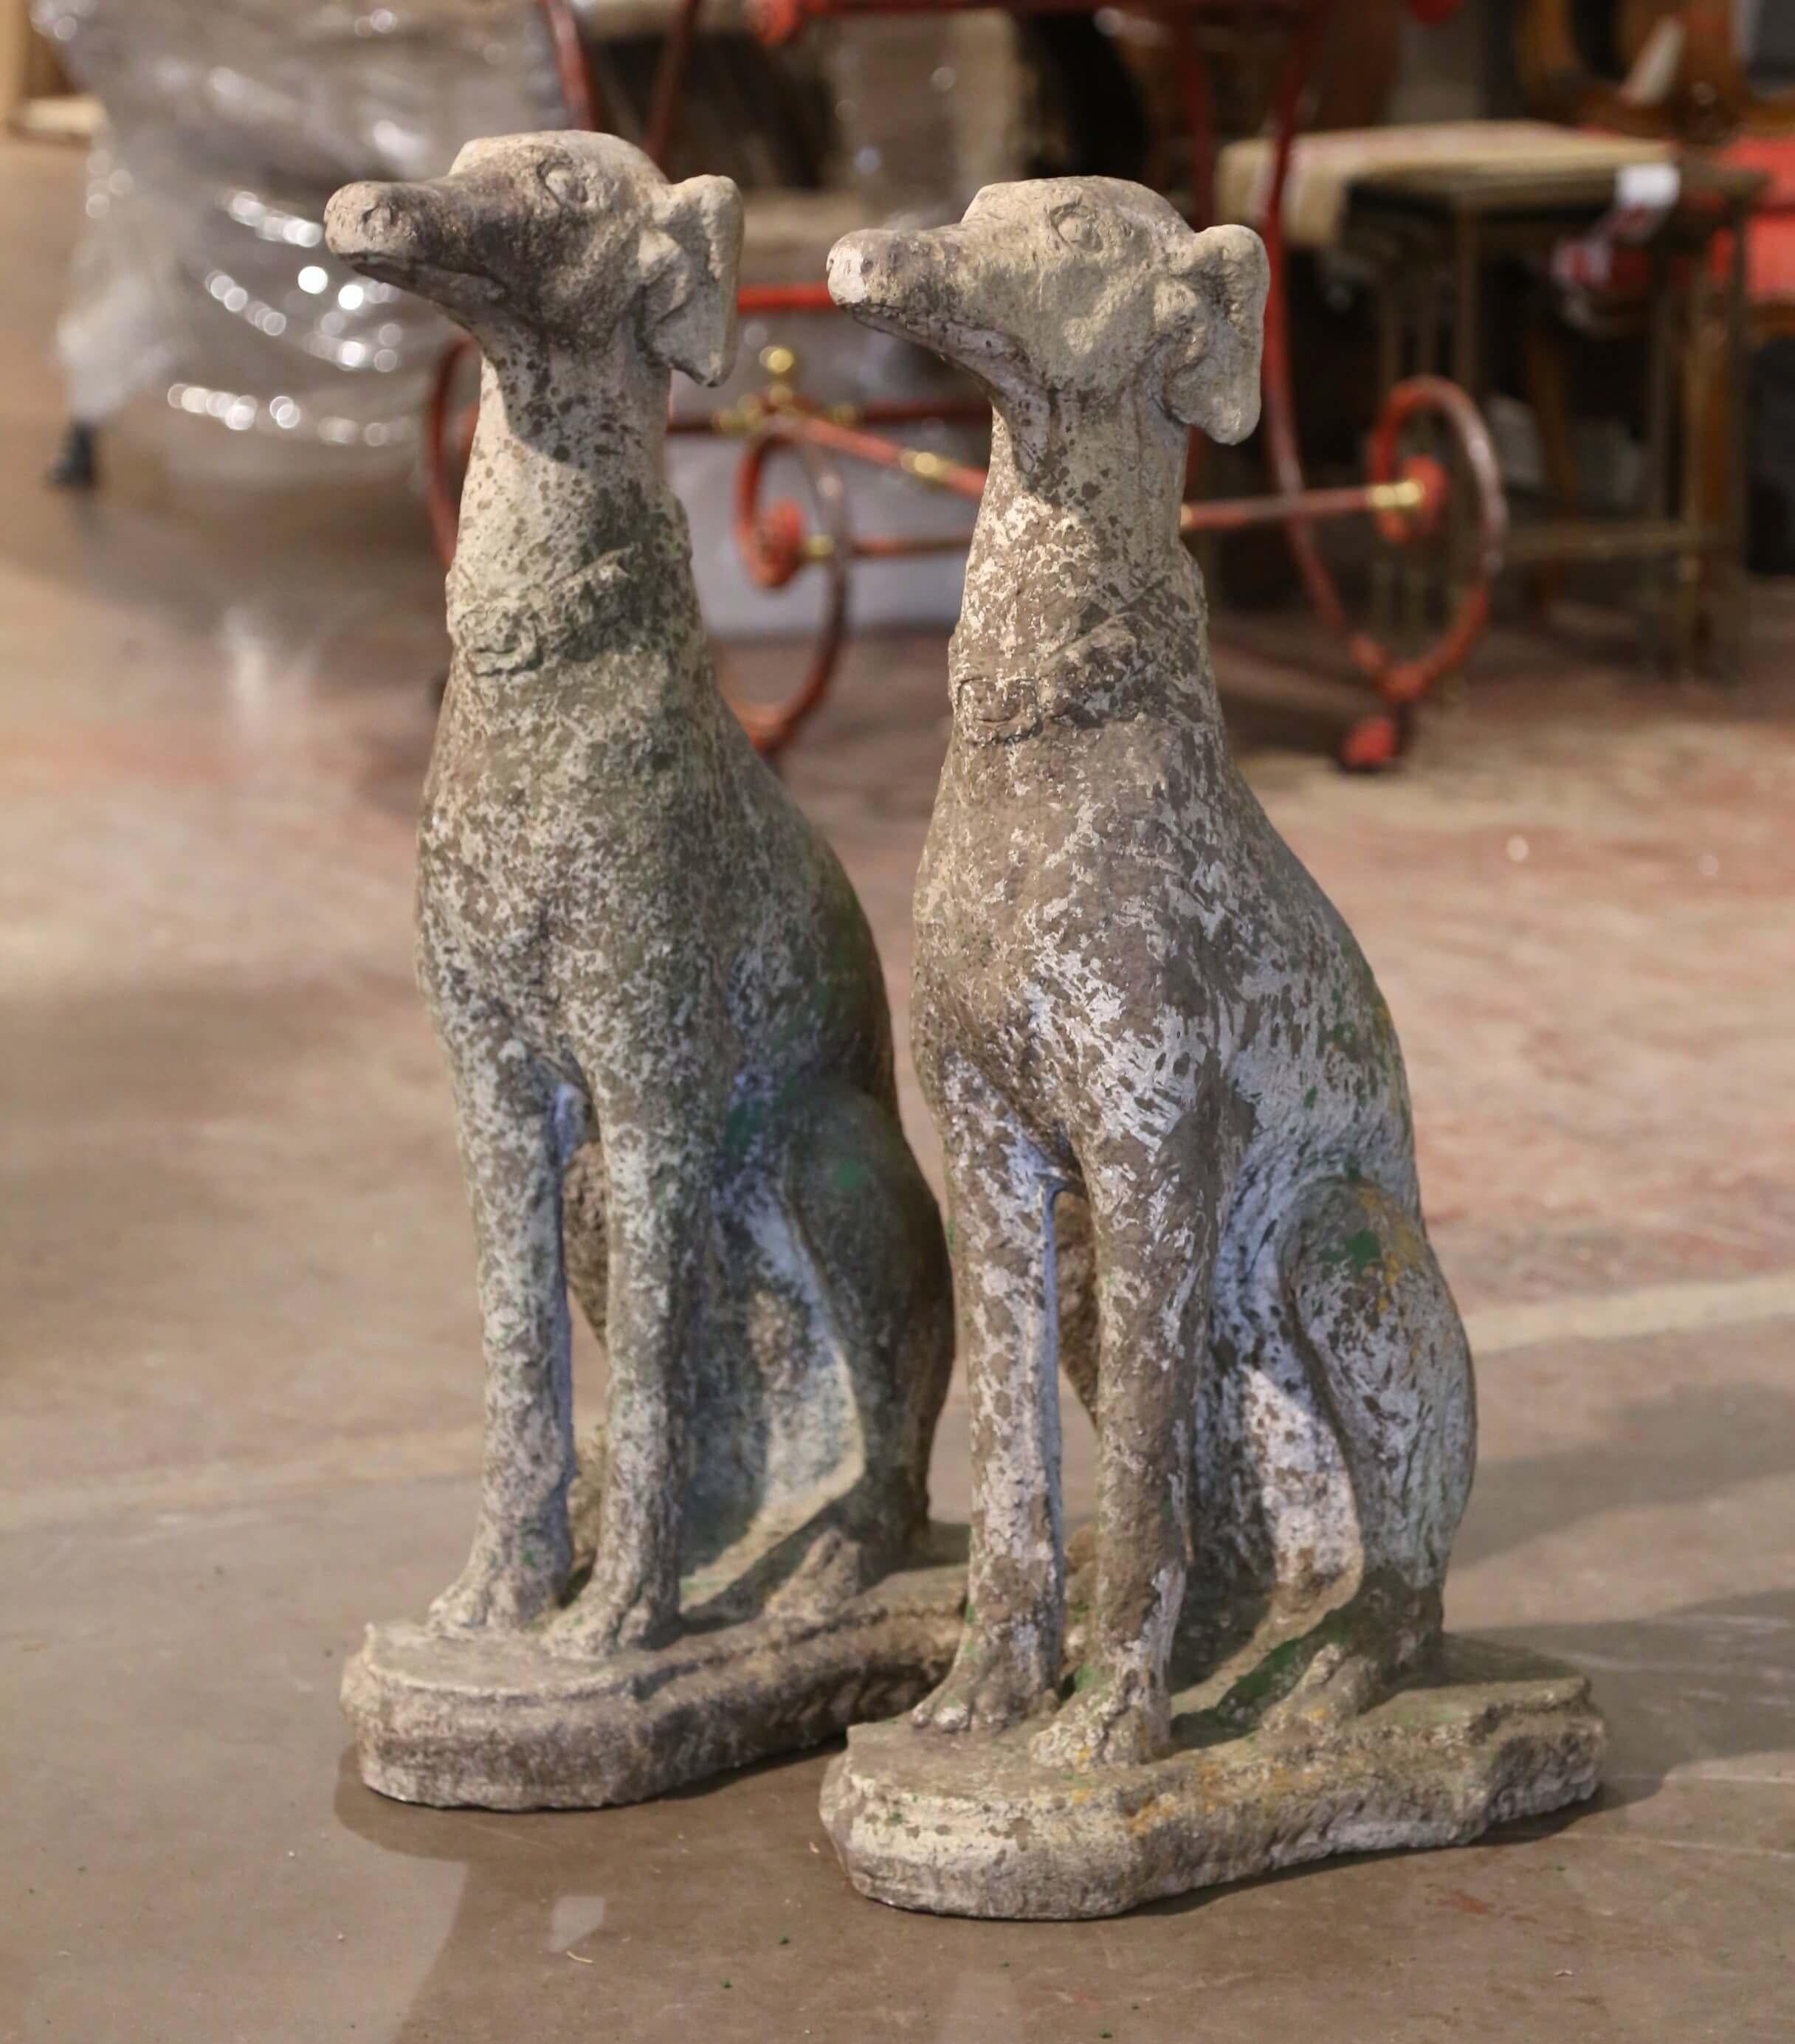 Carved of stone, the tall greyhounds are set on an integral flat base; seated on their back legs, both dogs have a proud expression further embellished with a collar around their neck. The vintage garden sculptures adorn a patinated antique